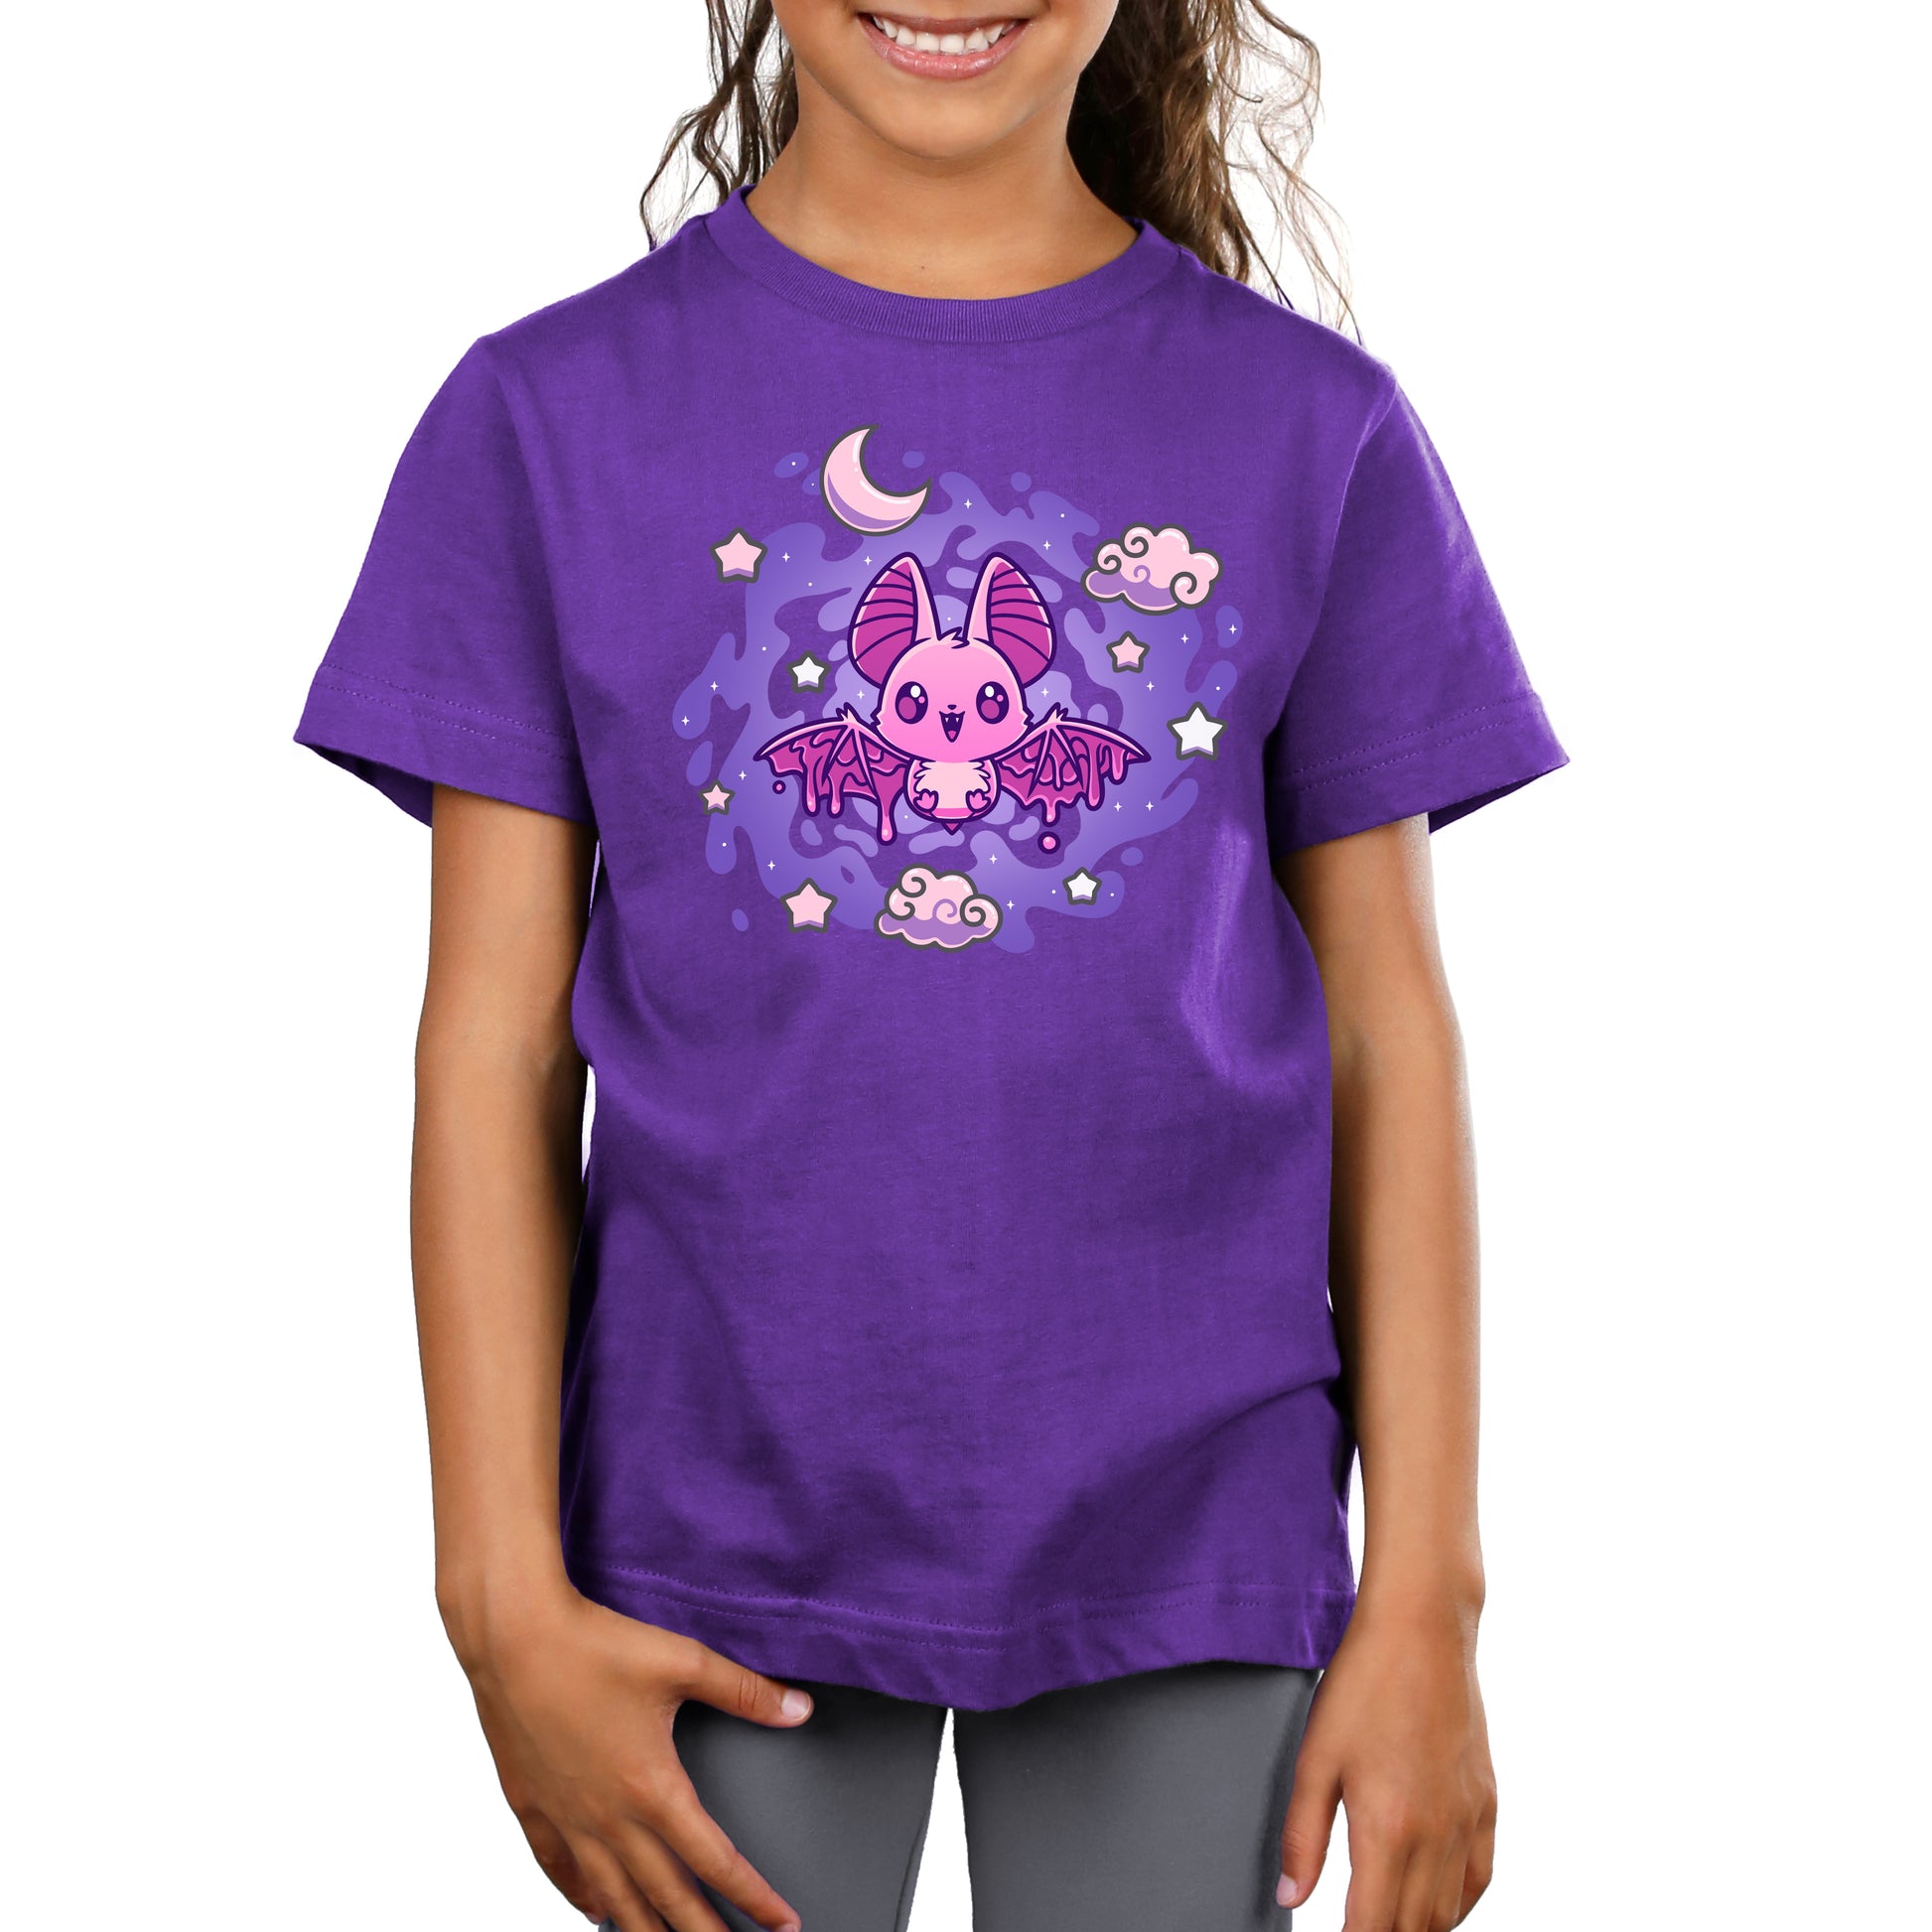 A young child wearing a purple kids T-shirt featuring a pink cartoon bat with stars, clouds, and a crescent moon in the background. The T-shirt is called Itty Bitty Bat and is from the brand monsterdigital.